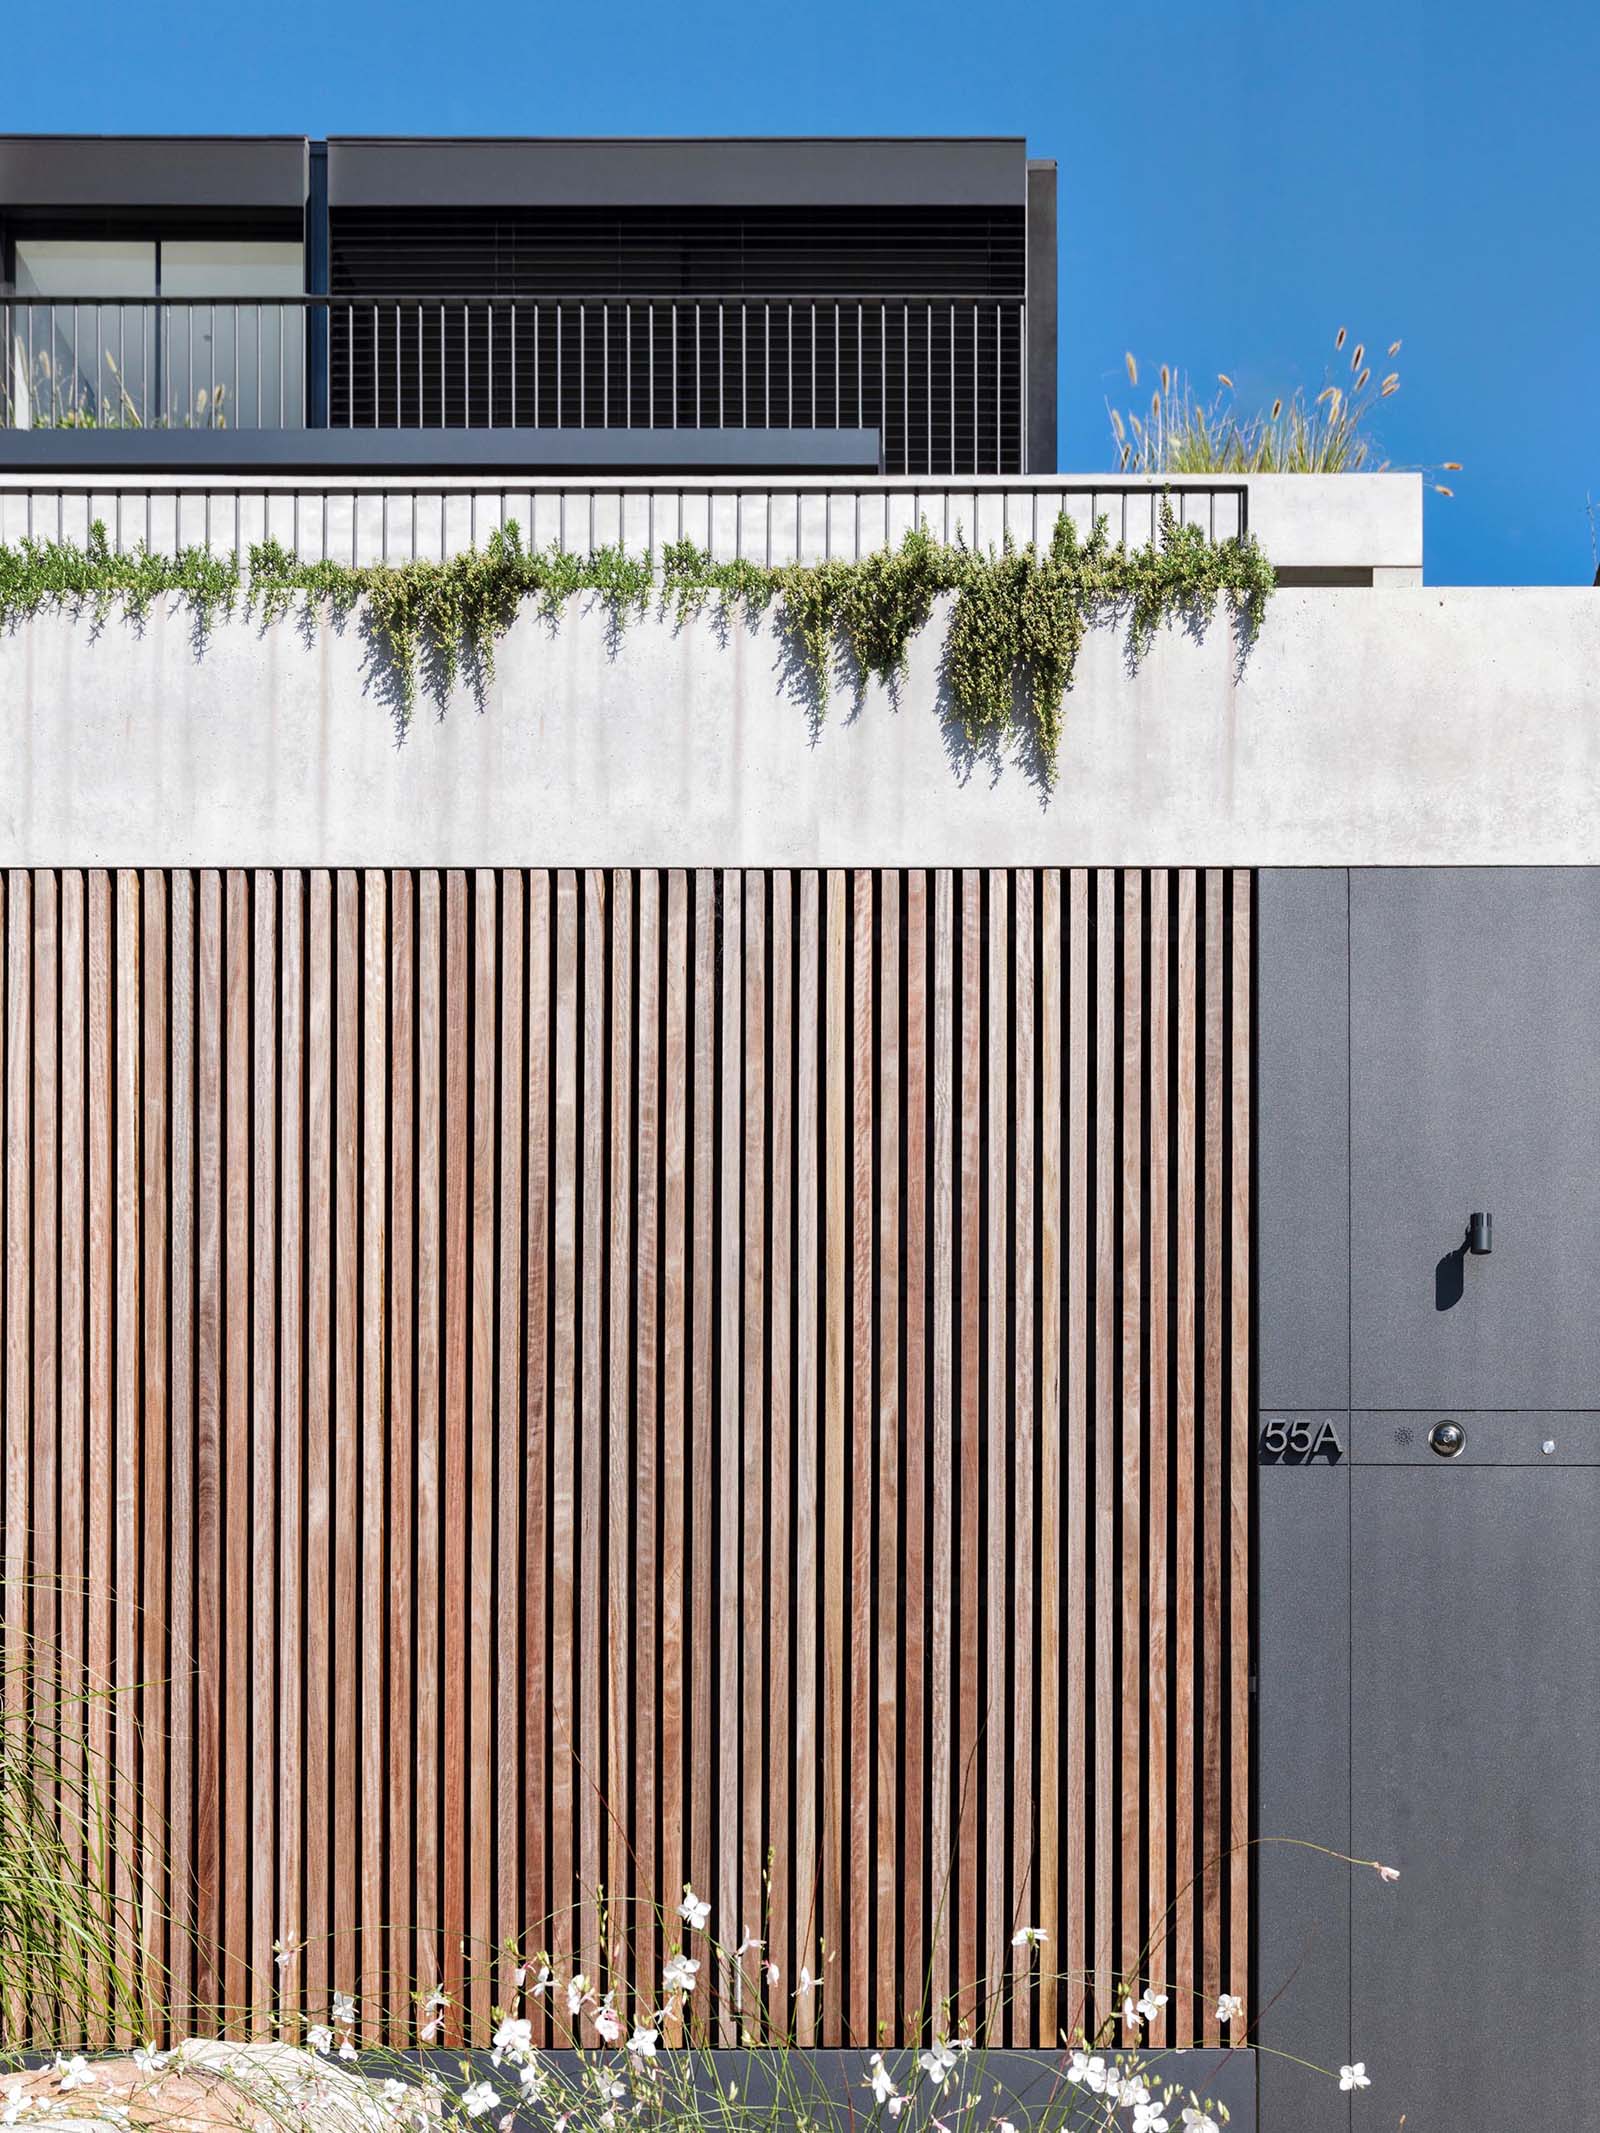 This Australian home is designed with a series of terraced floors that climb the steep block from the street.